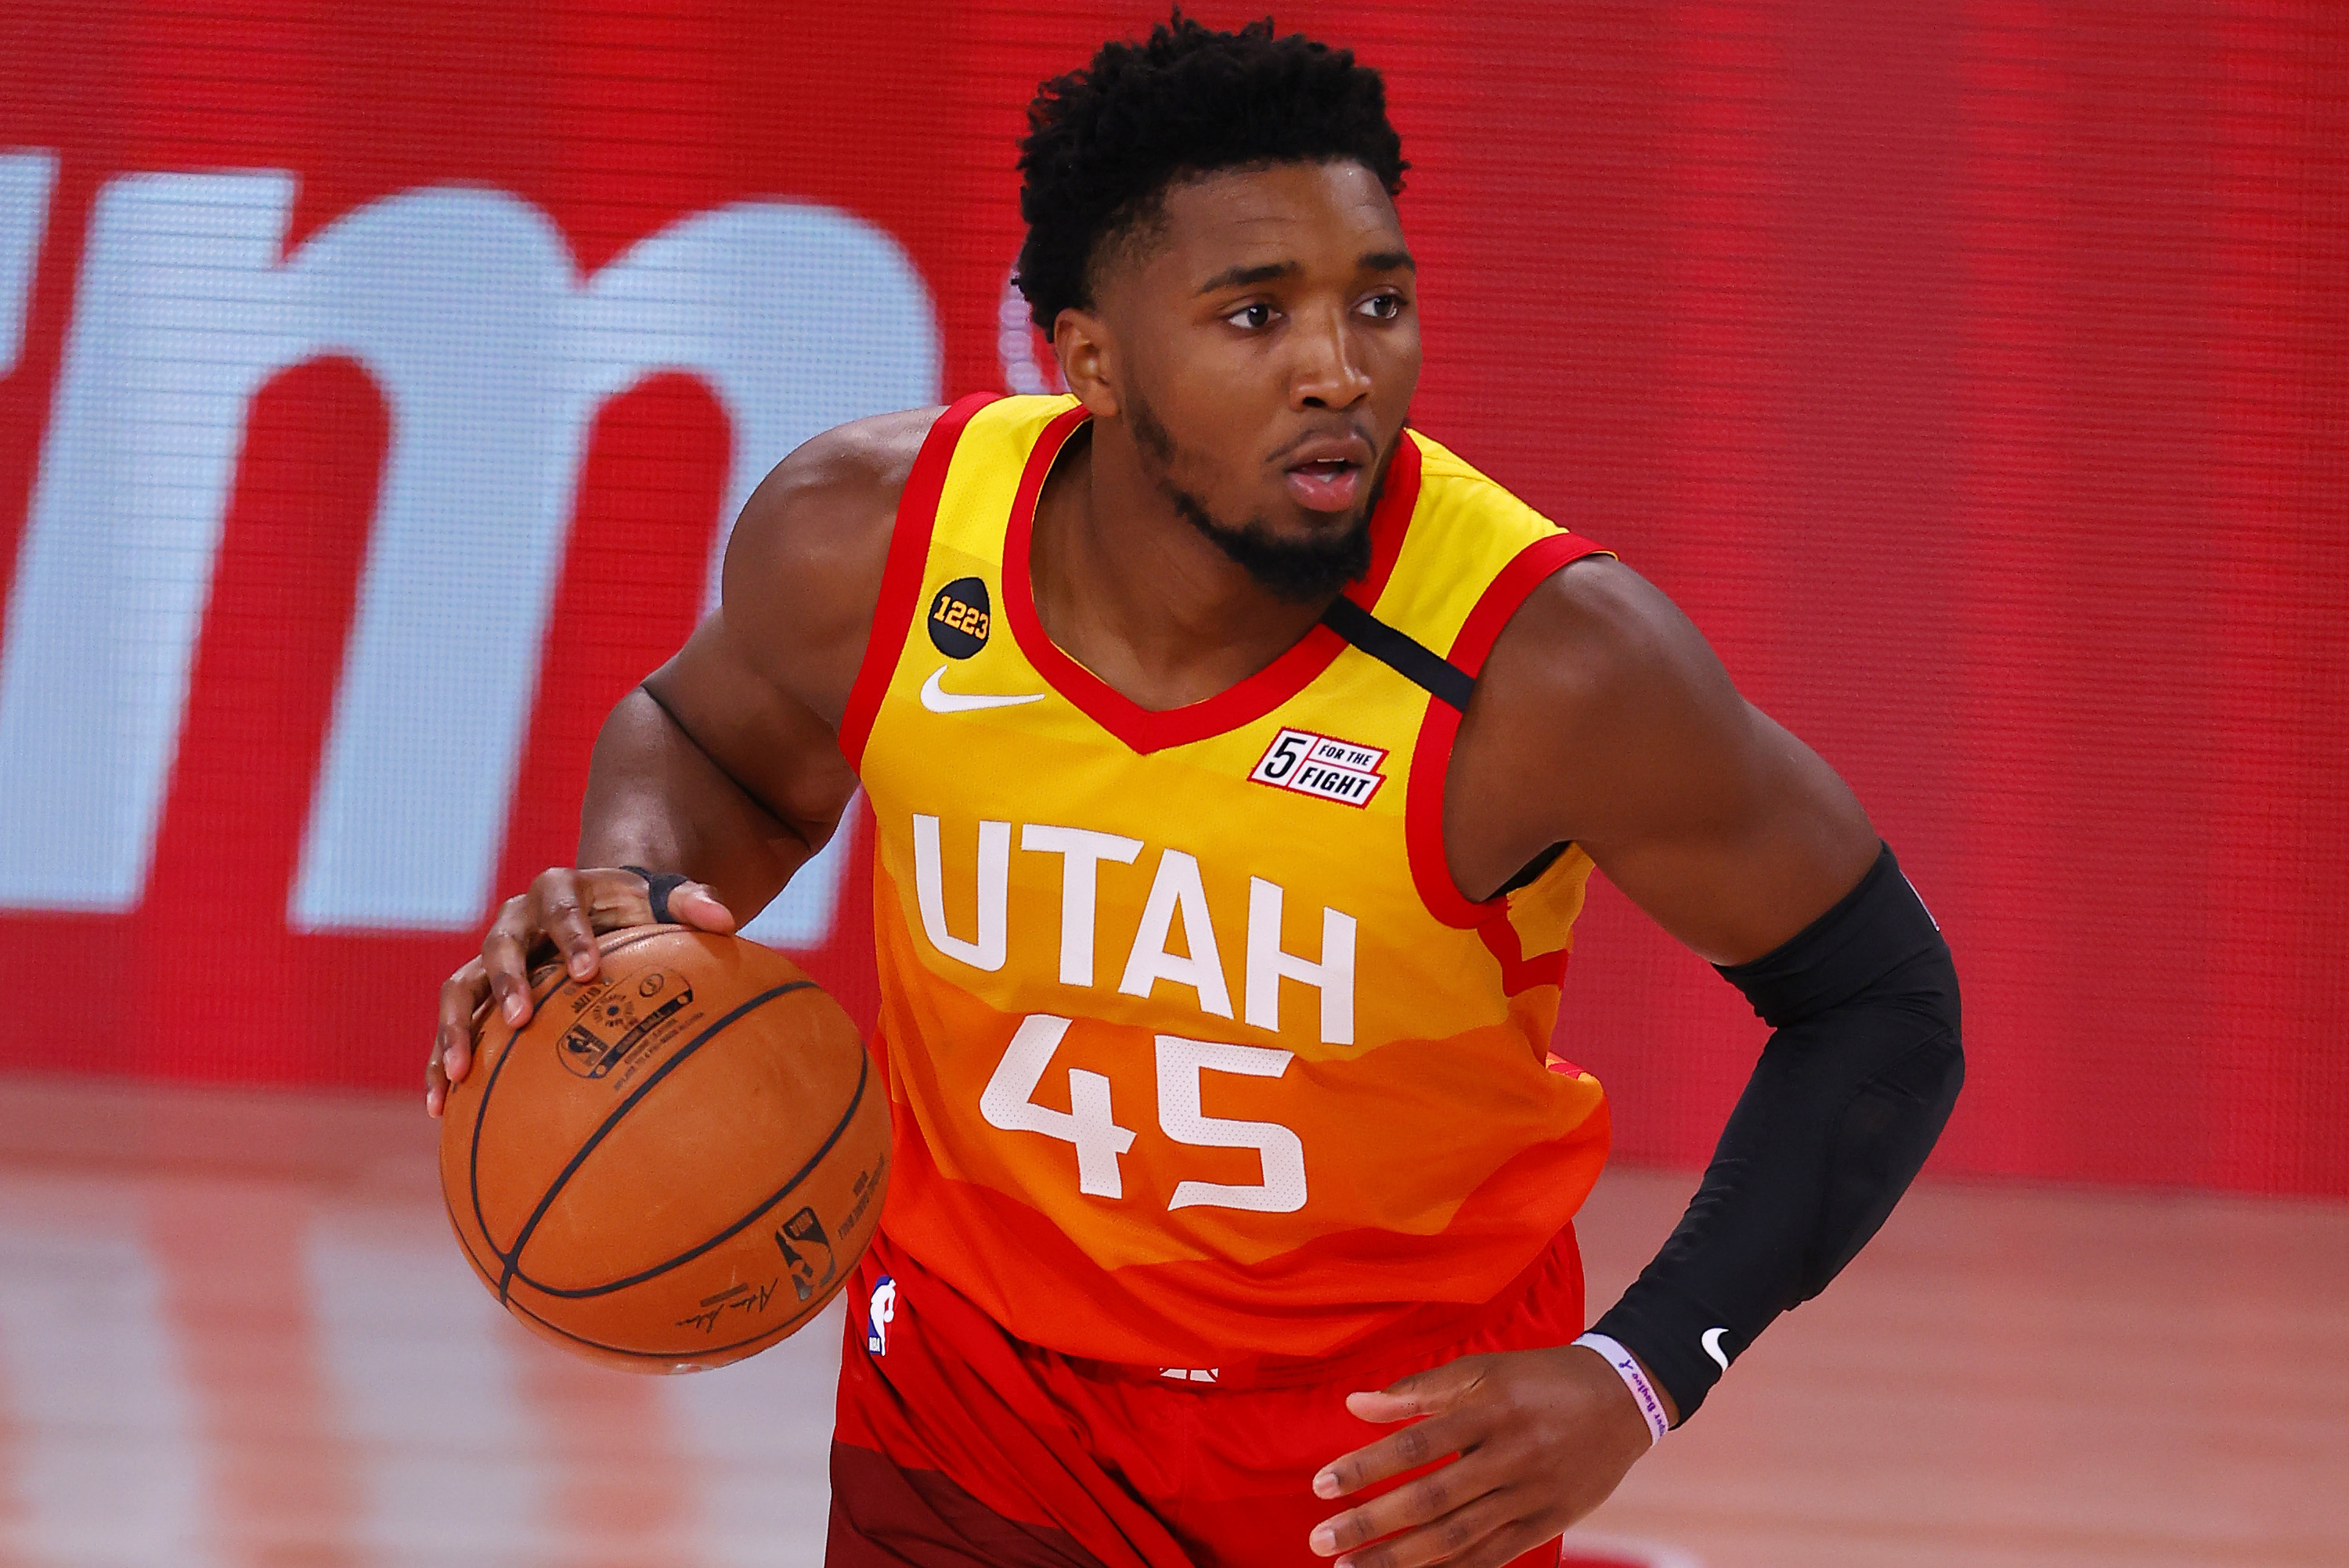 Utah Jazz star Donovan Mitchell to give U's 2021 commencement